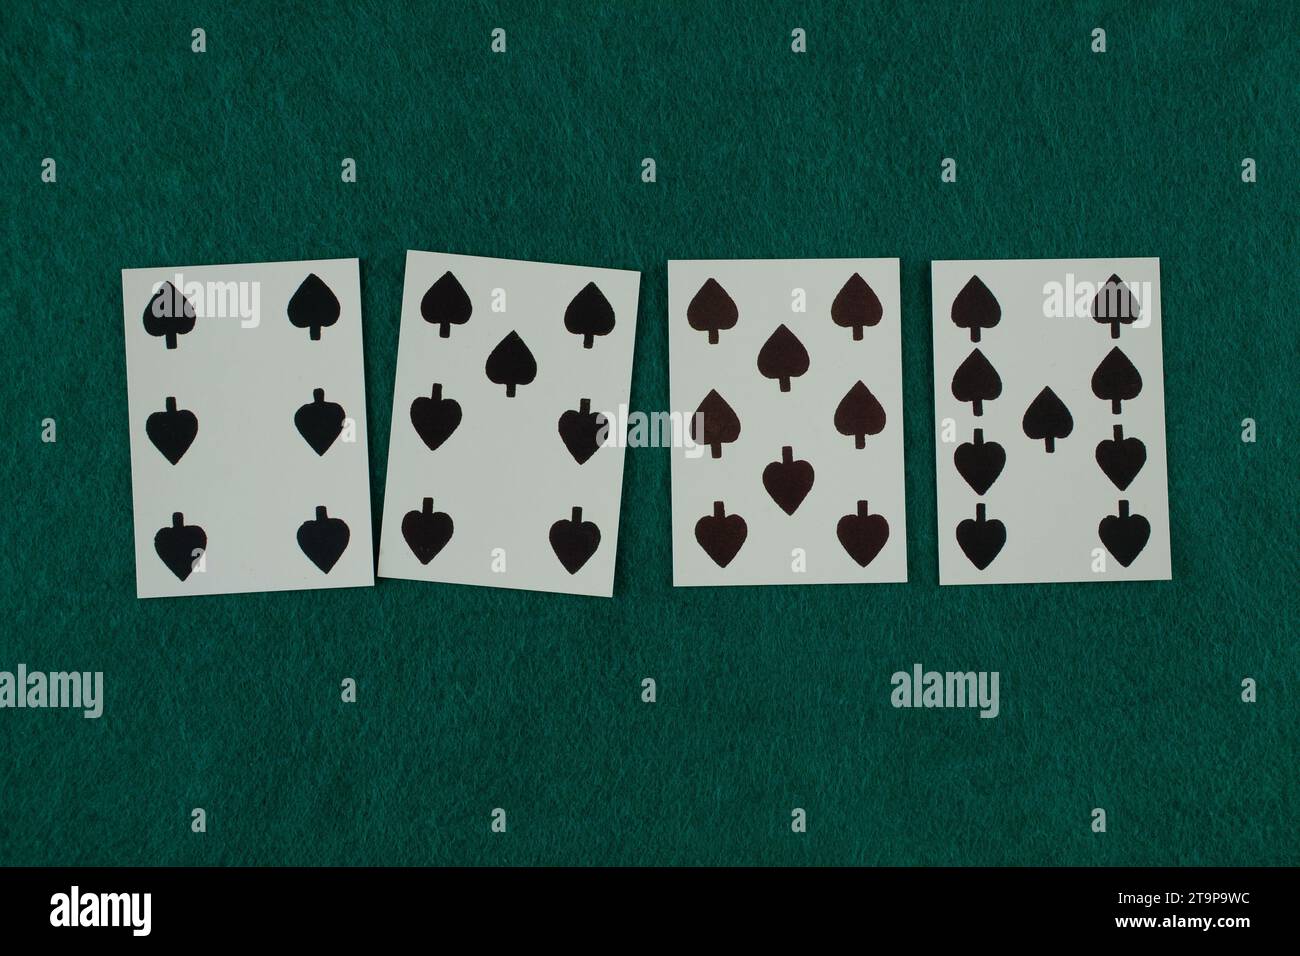 Old west era playing card on green gambling table. 6, 7, 8, 9 of spades. Stock Photo